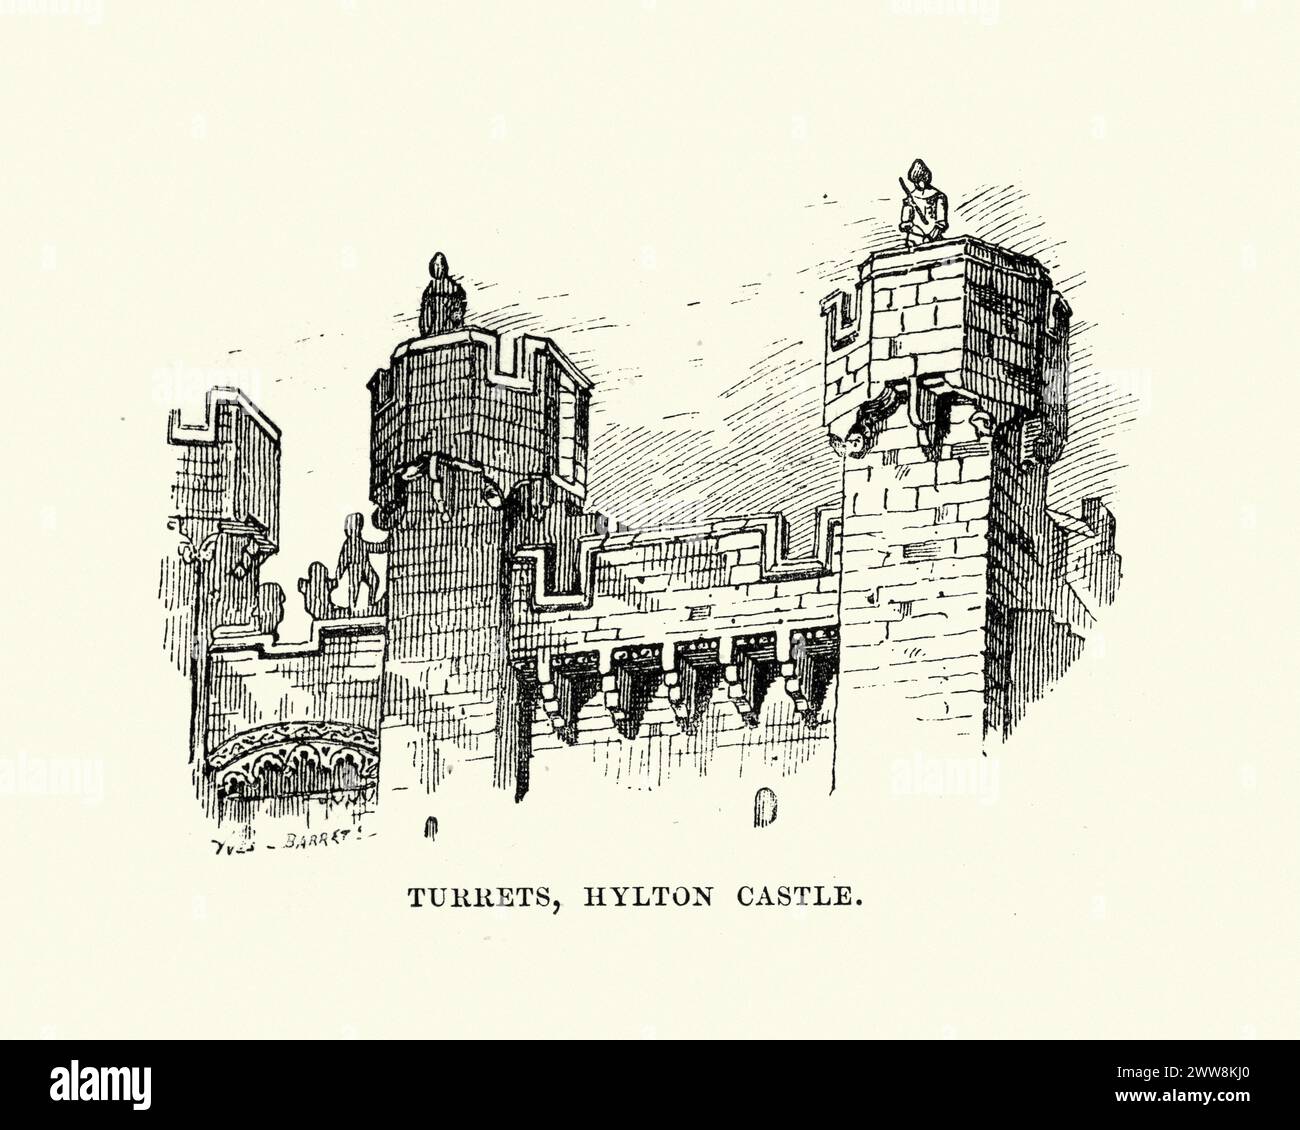 Vintage engraving of Medieval architecture, Turrets, Hylton Castle, Sunderland. A stone castle in the North Hylton area of Sunderland, 14th to early 15th century, Gothic Stock Photo